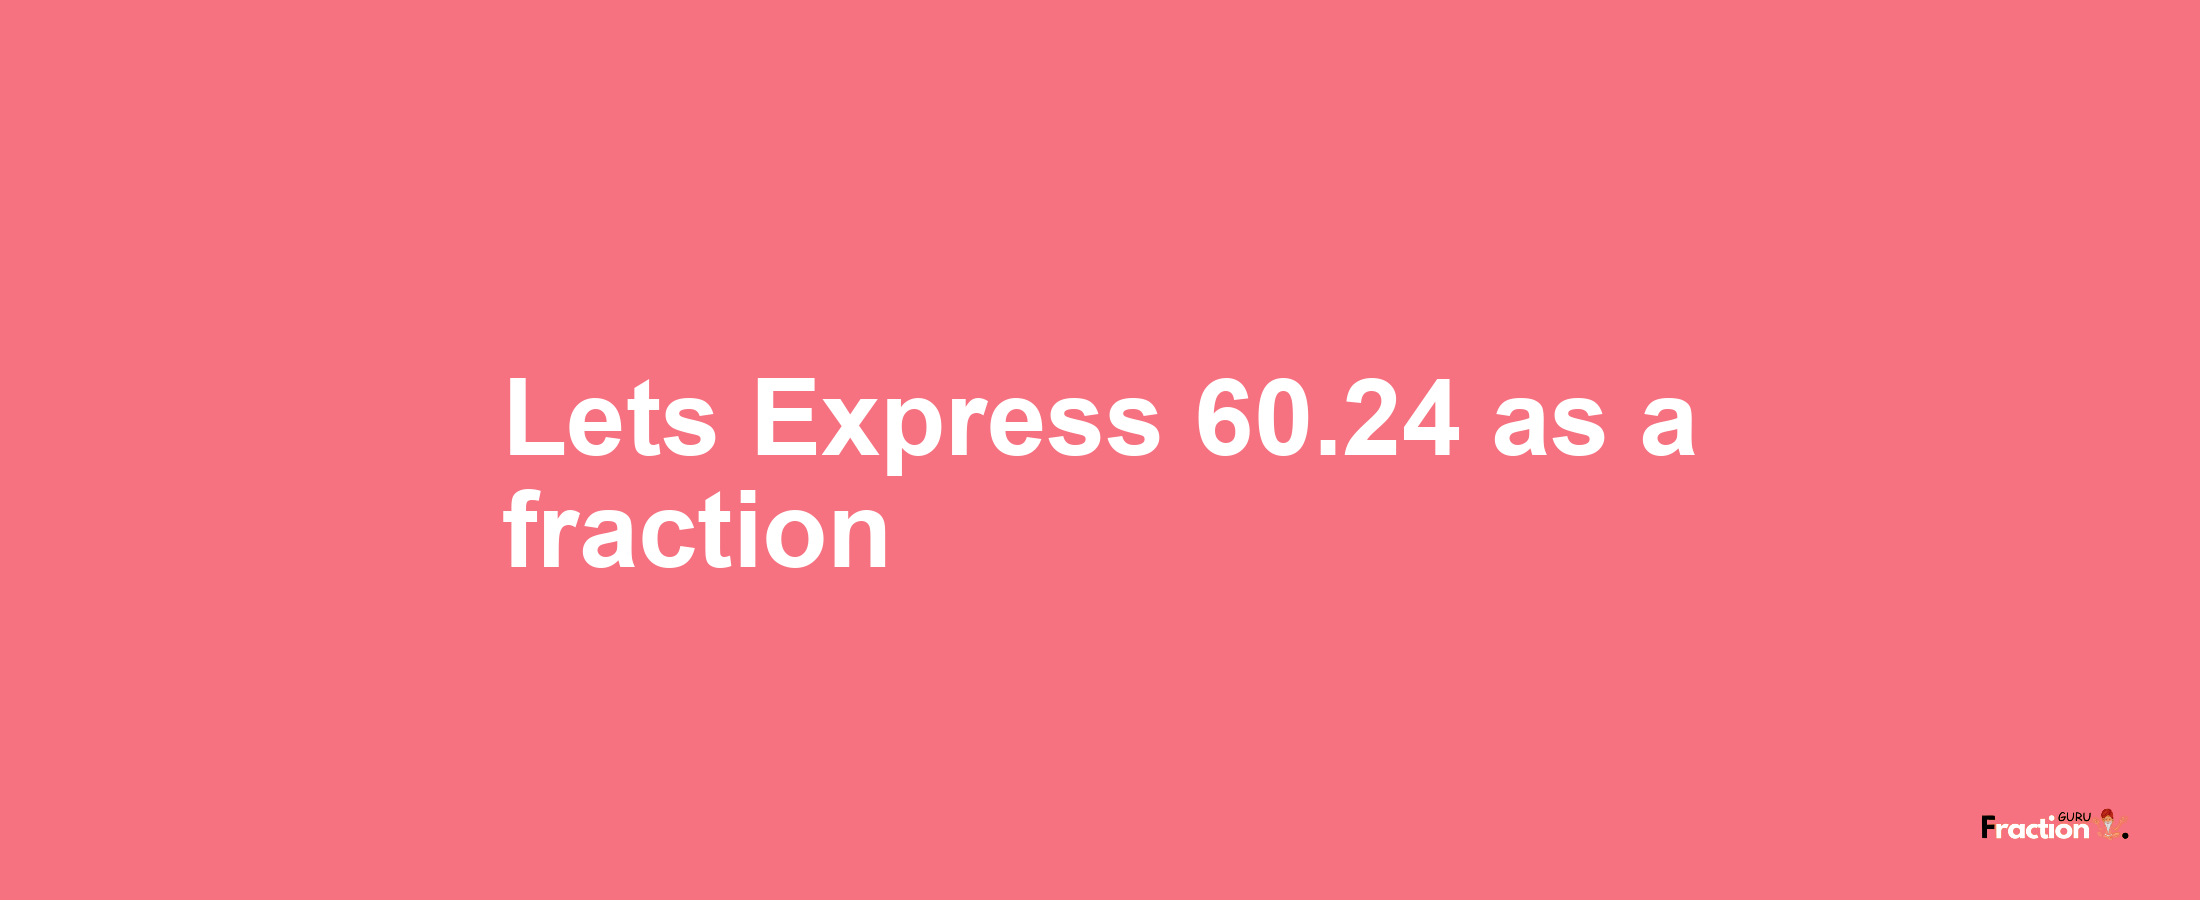 Lets Express 60.24 as afraction